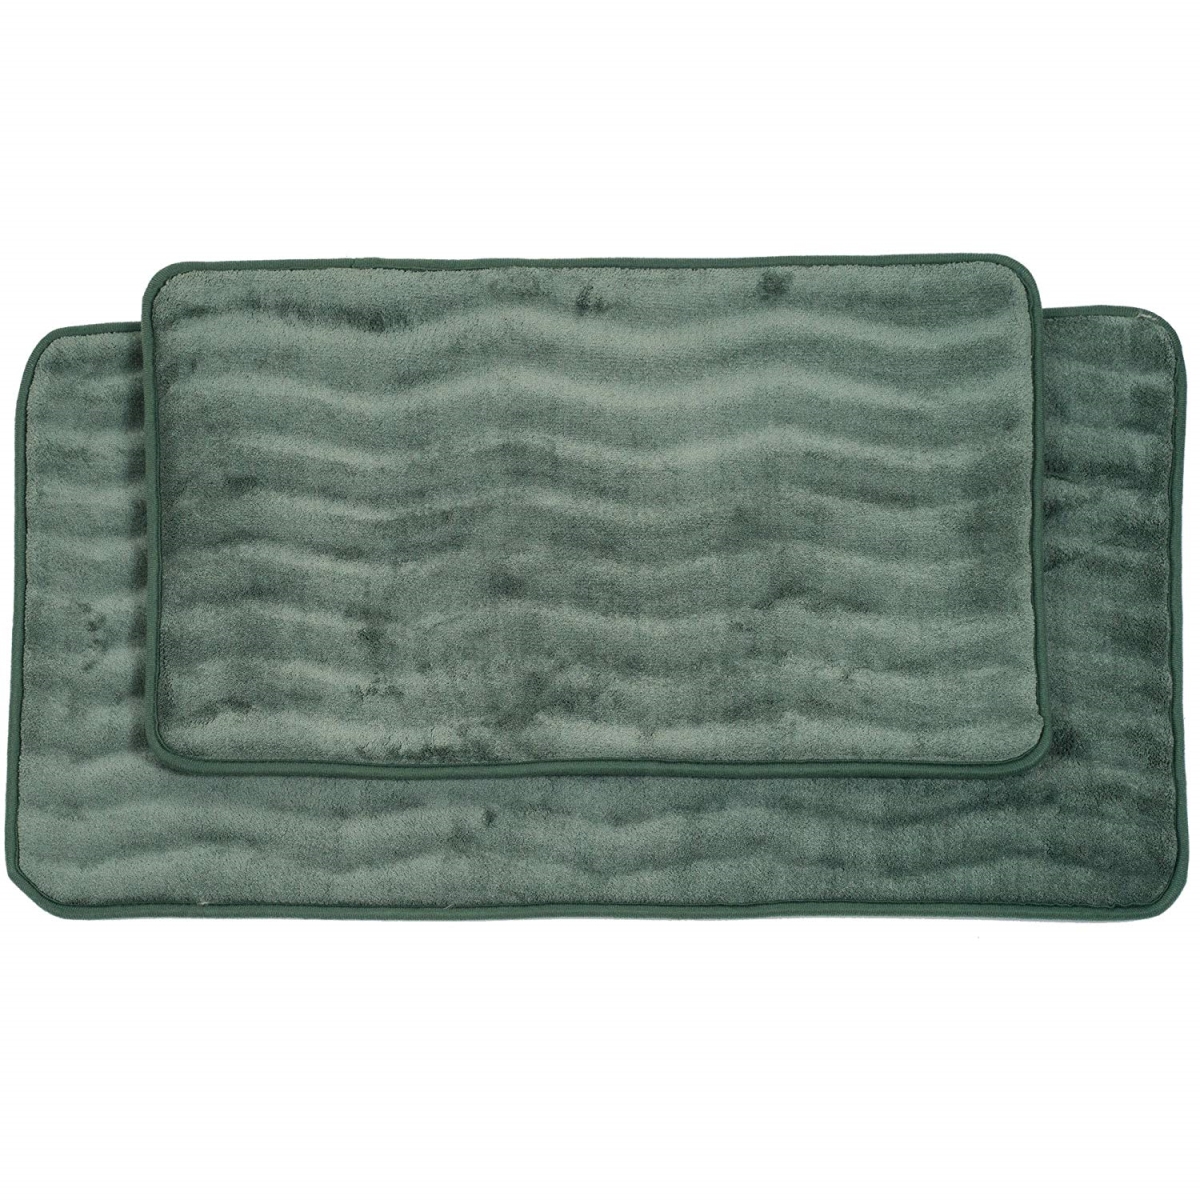 Picture of Bedford Home 67A-26587 Two Piece Foam Bath Mat Set - Green